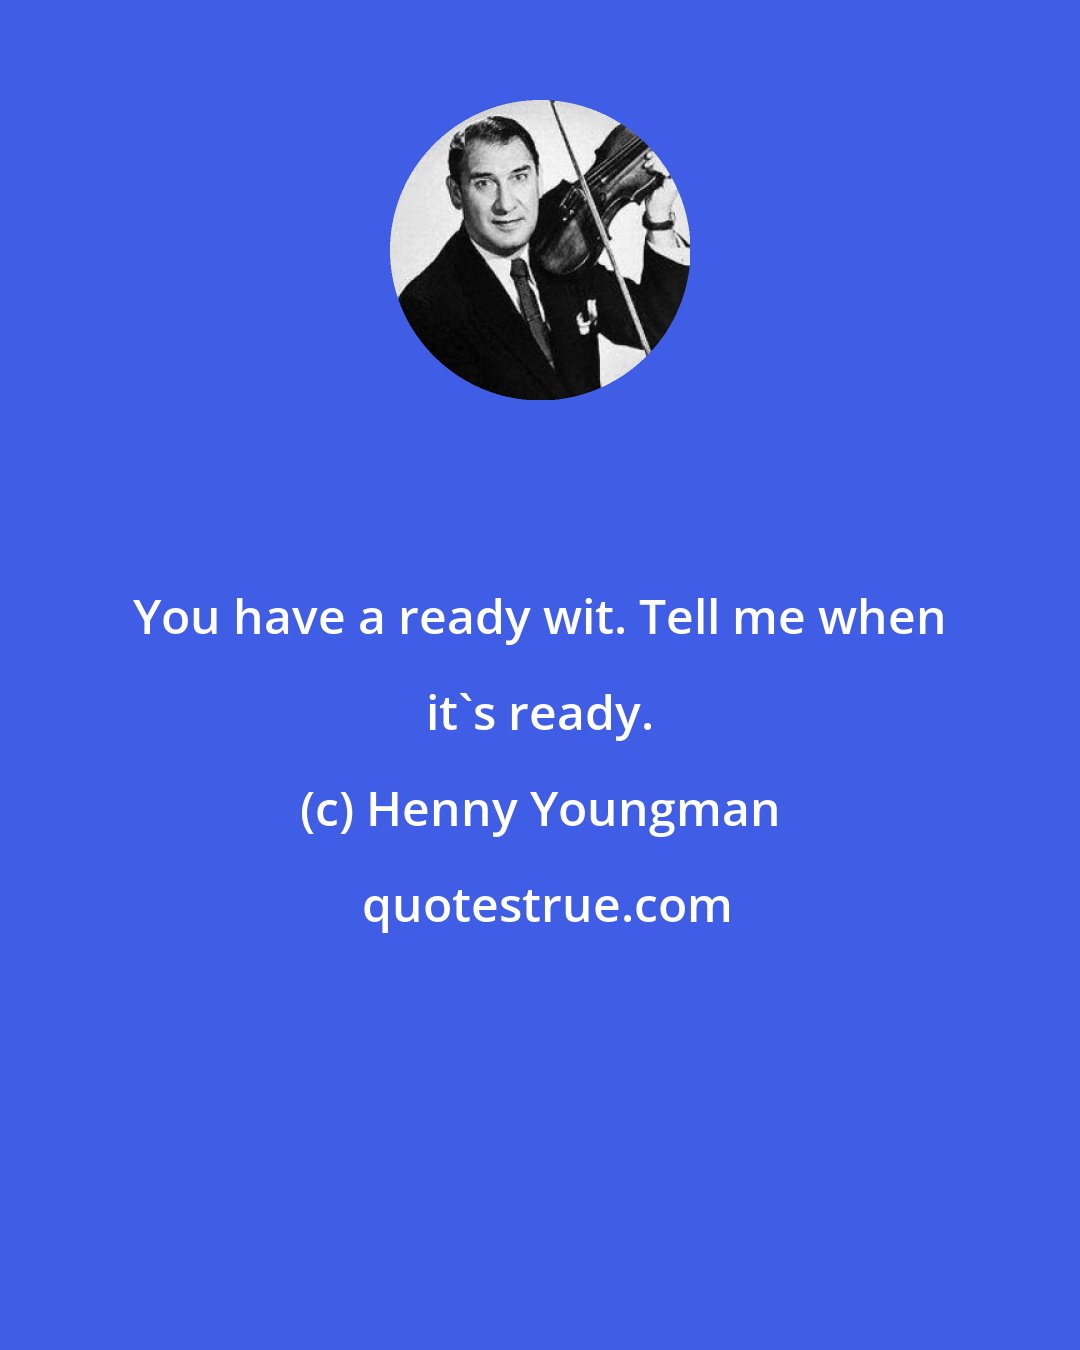 Henny Youngman: You have a ready wit. Tell me when it's ready.